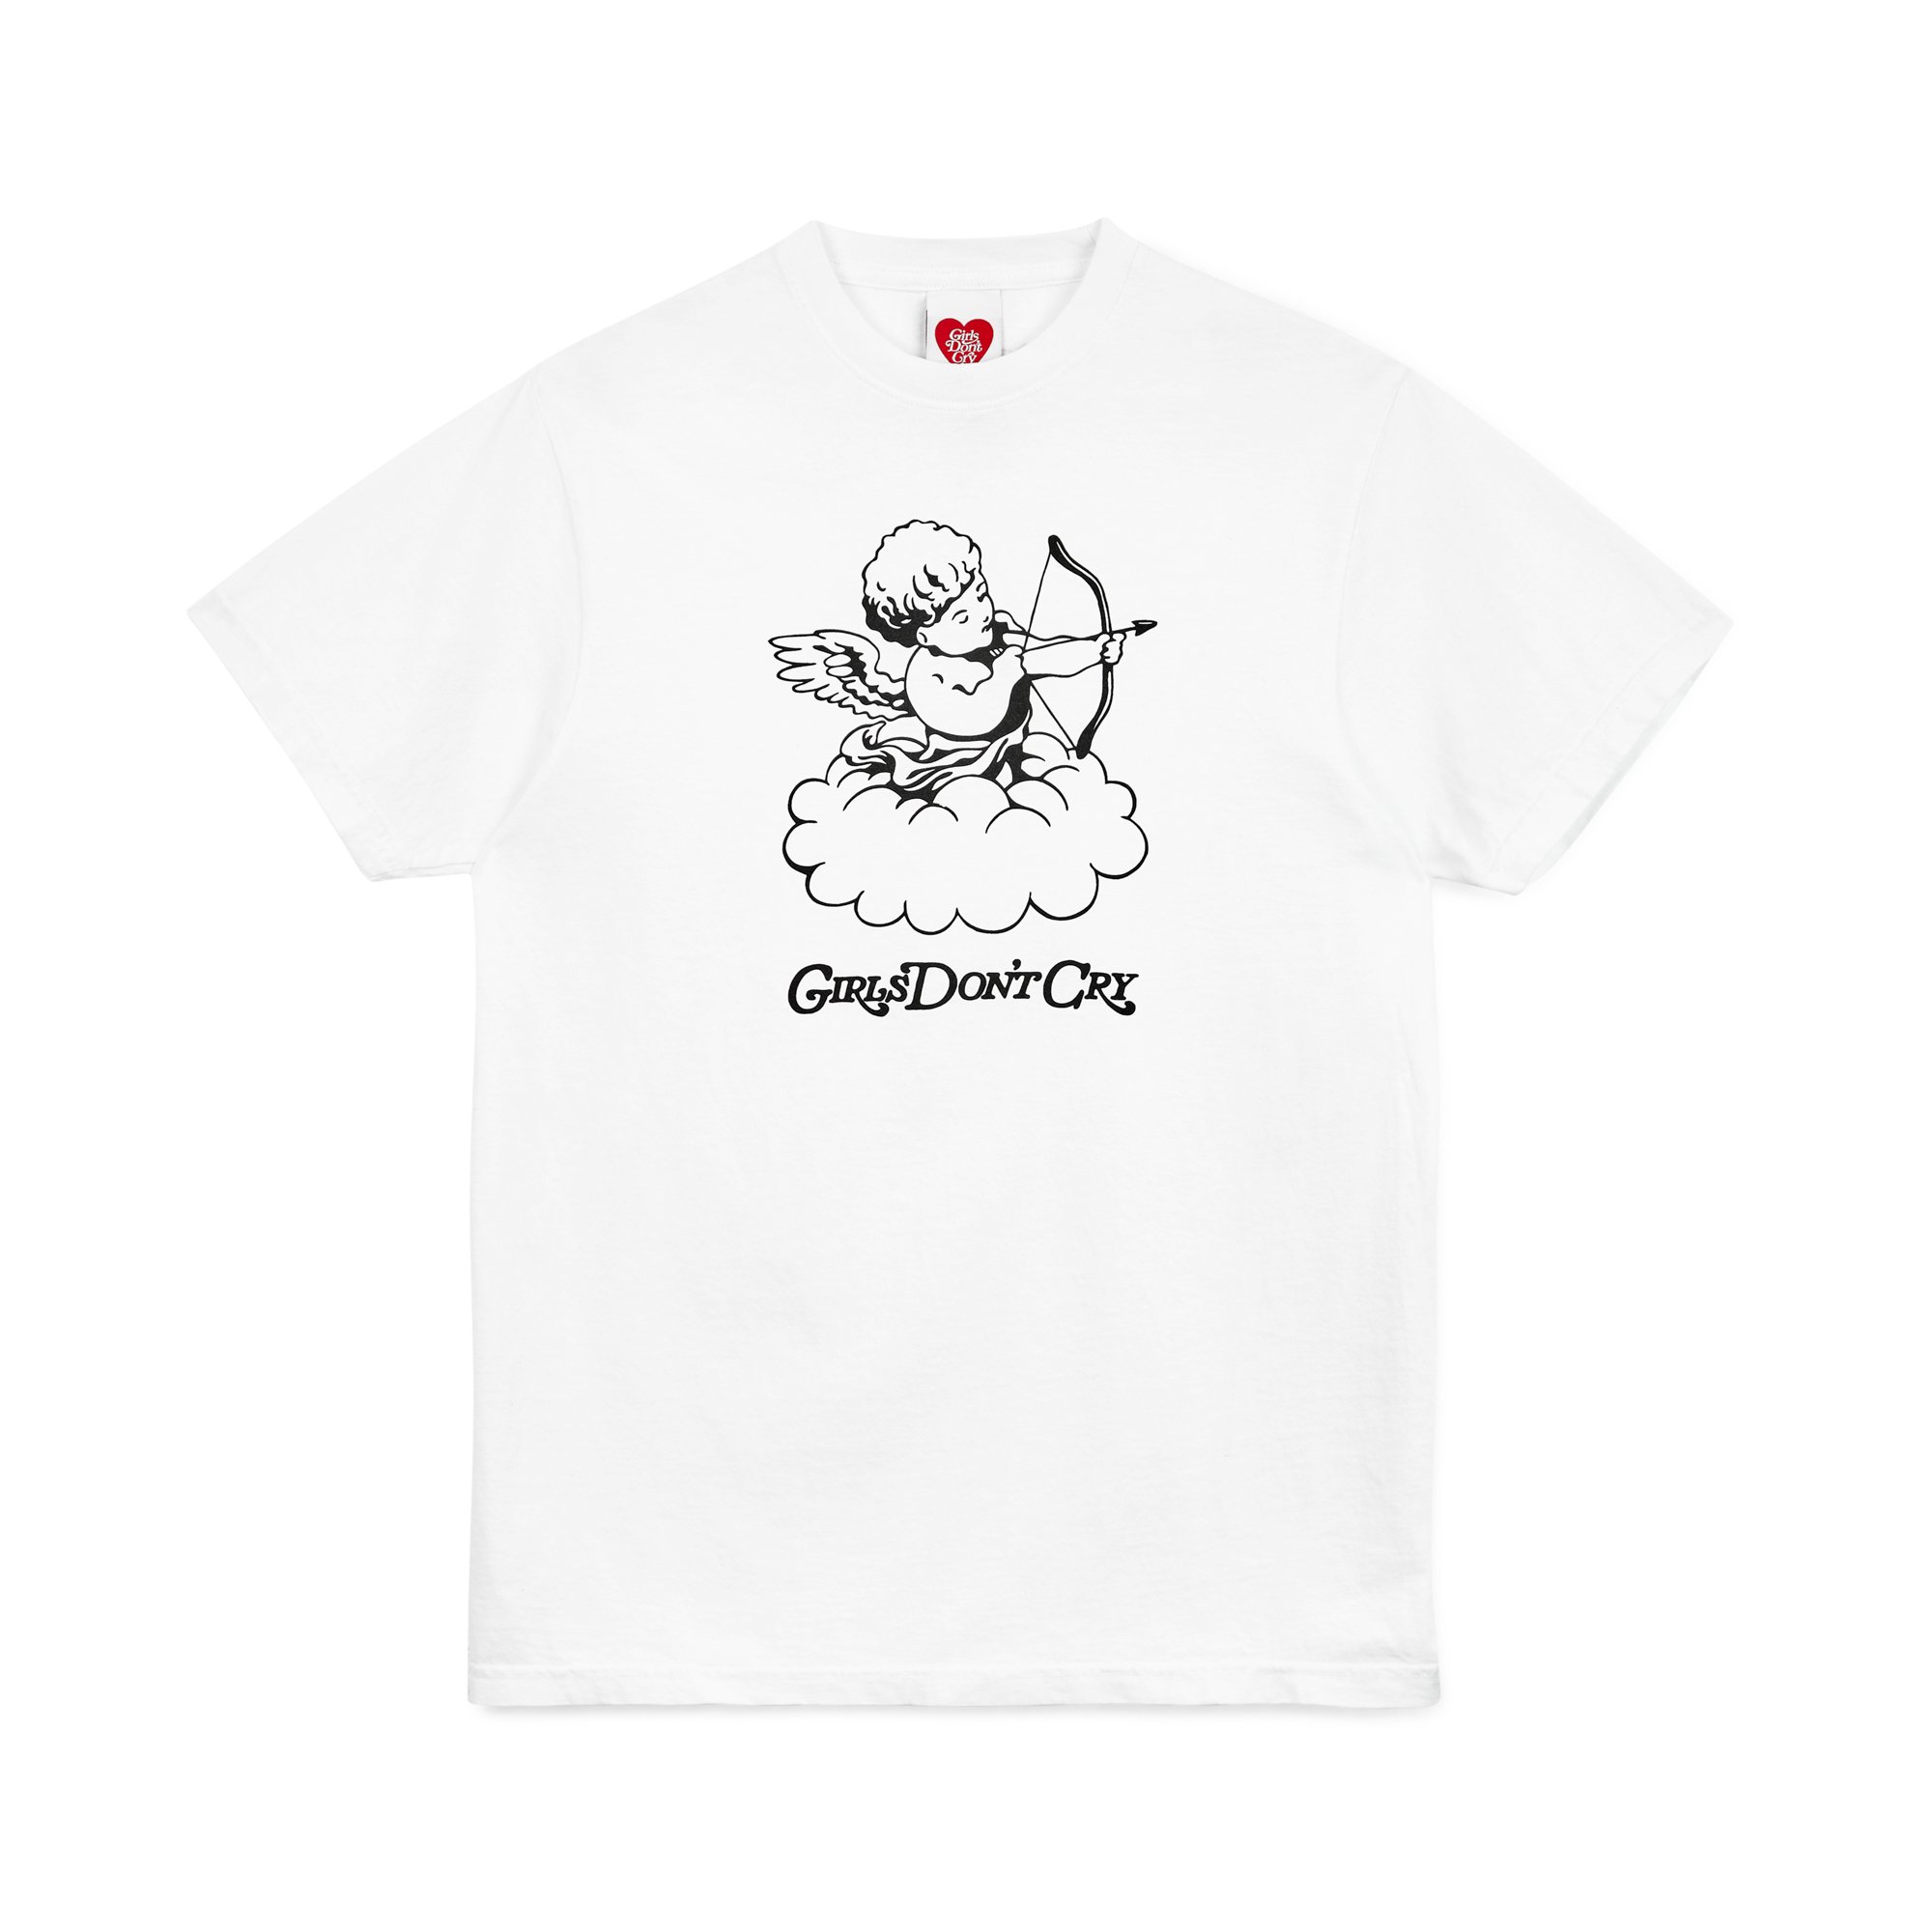 Girls Don't Cry GDC Angel Tee White XL